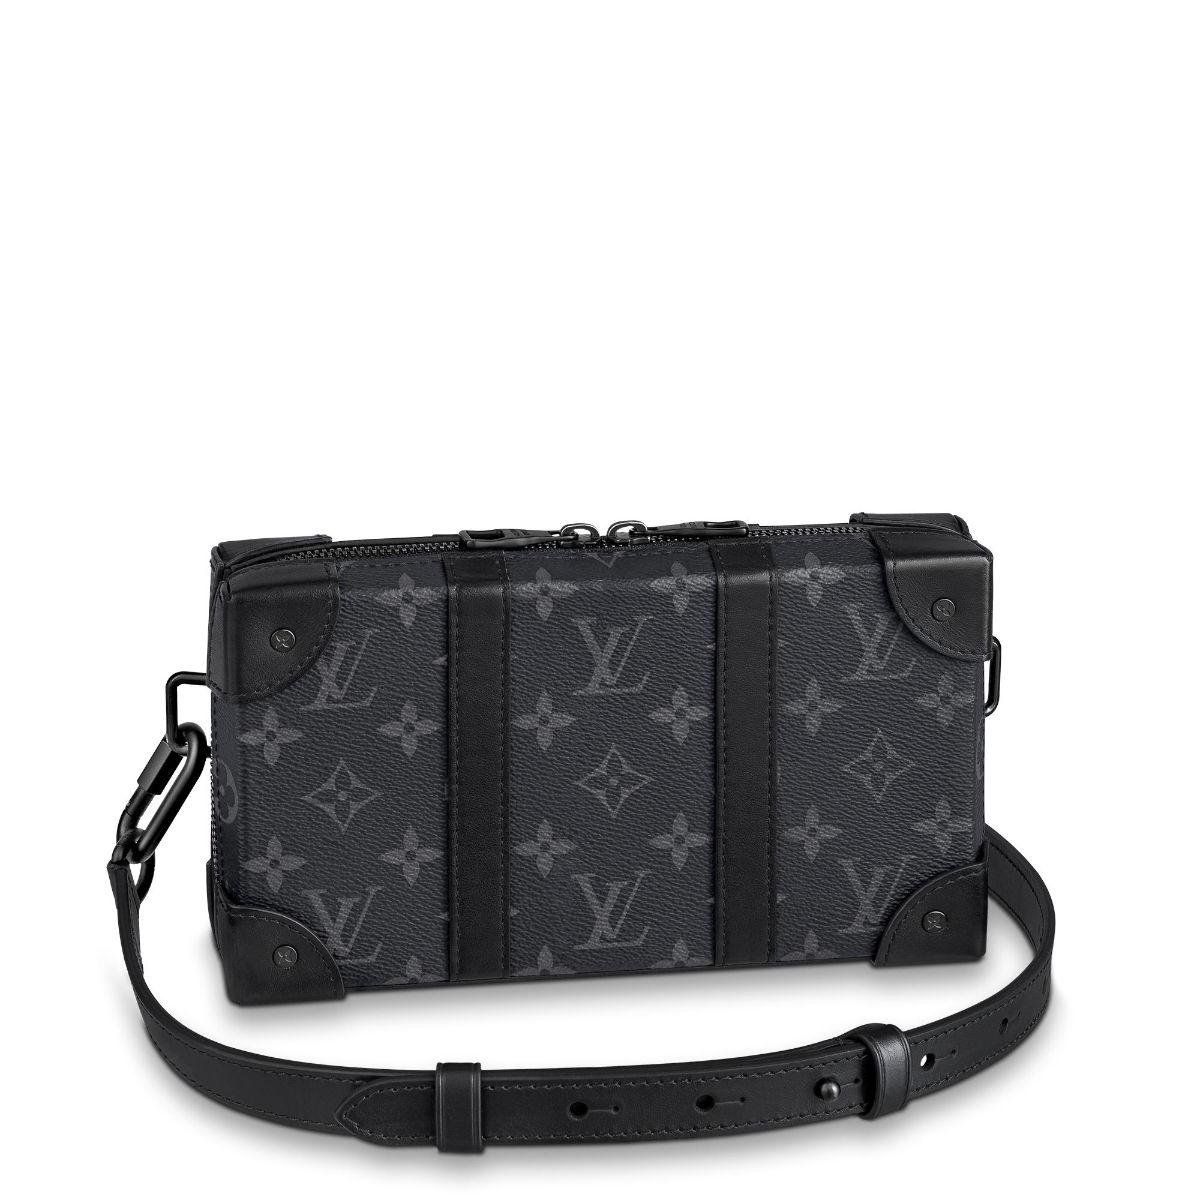 Louis Vuitton Christopher and Soft Trunk Bags